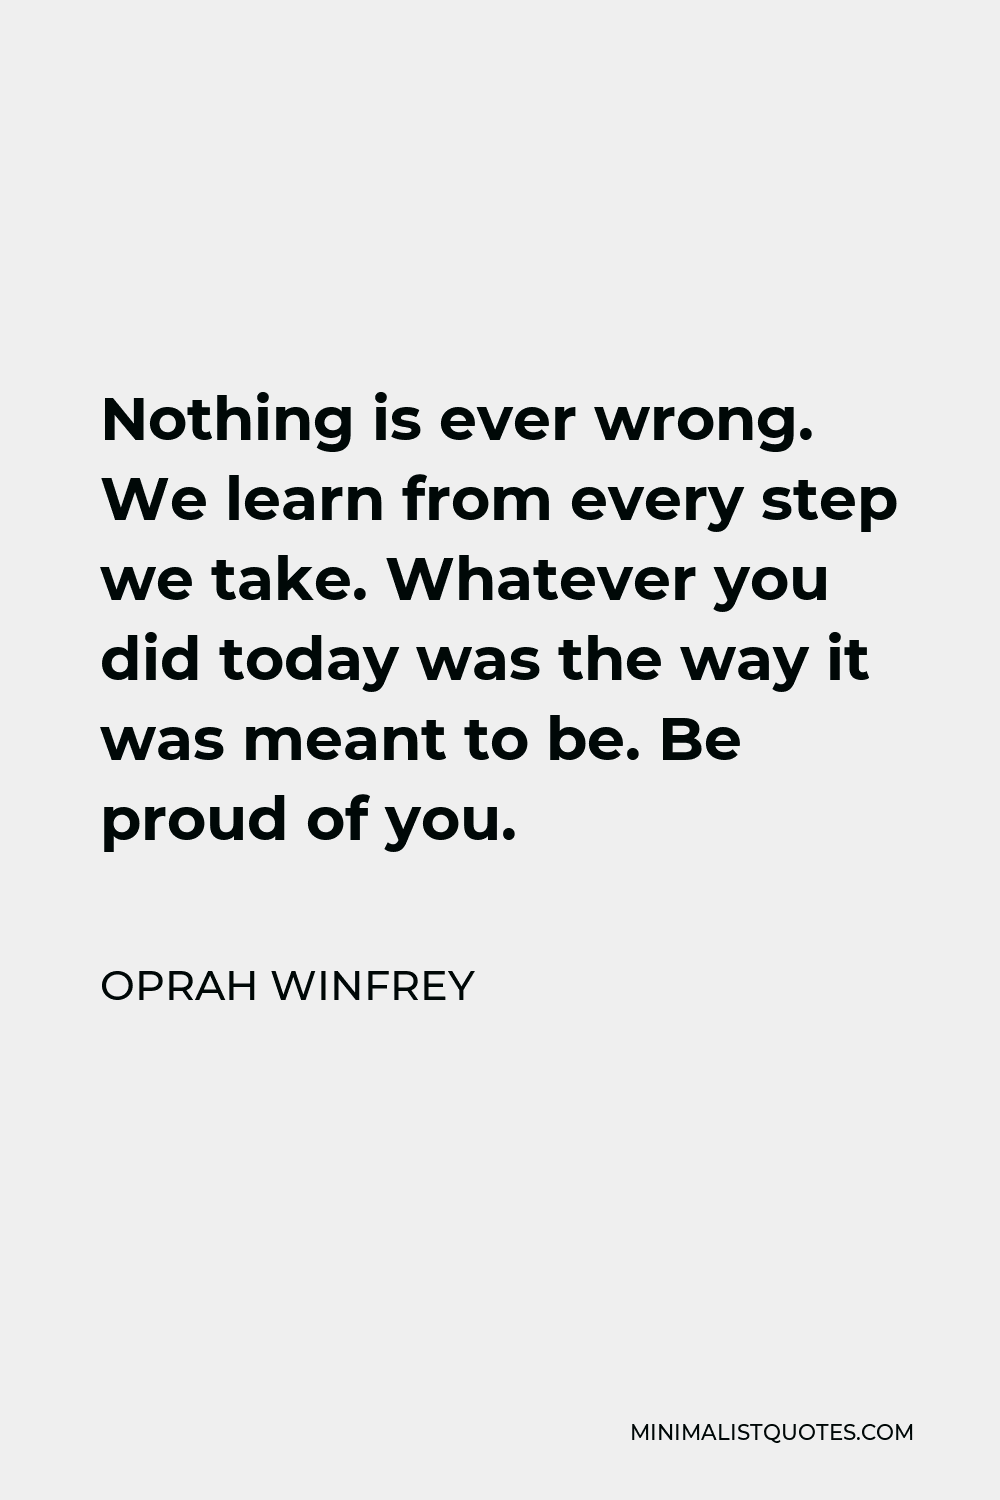 Oprah Winfrey Quote - Nothing is ever wrong. We learn from every step we take. Whatever you did today was the way it was meant to be. Be proud of you.